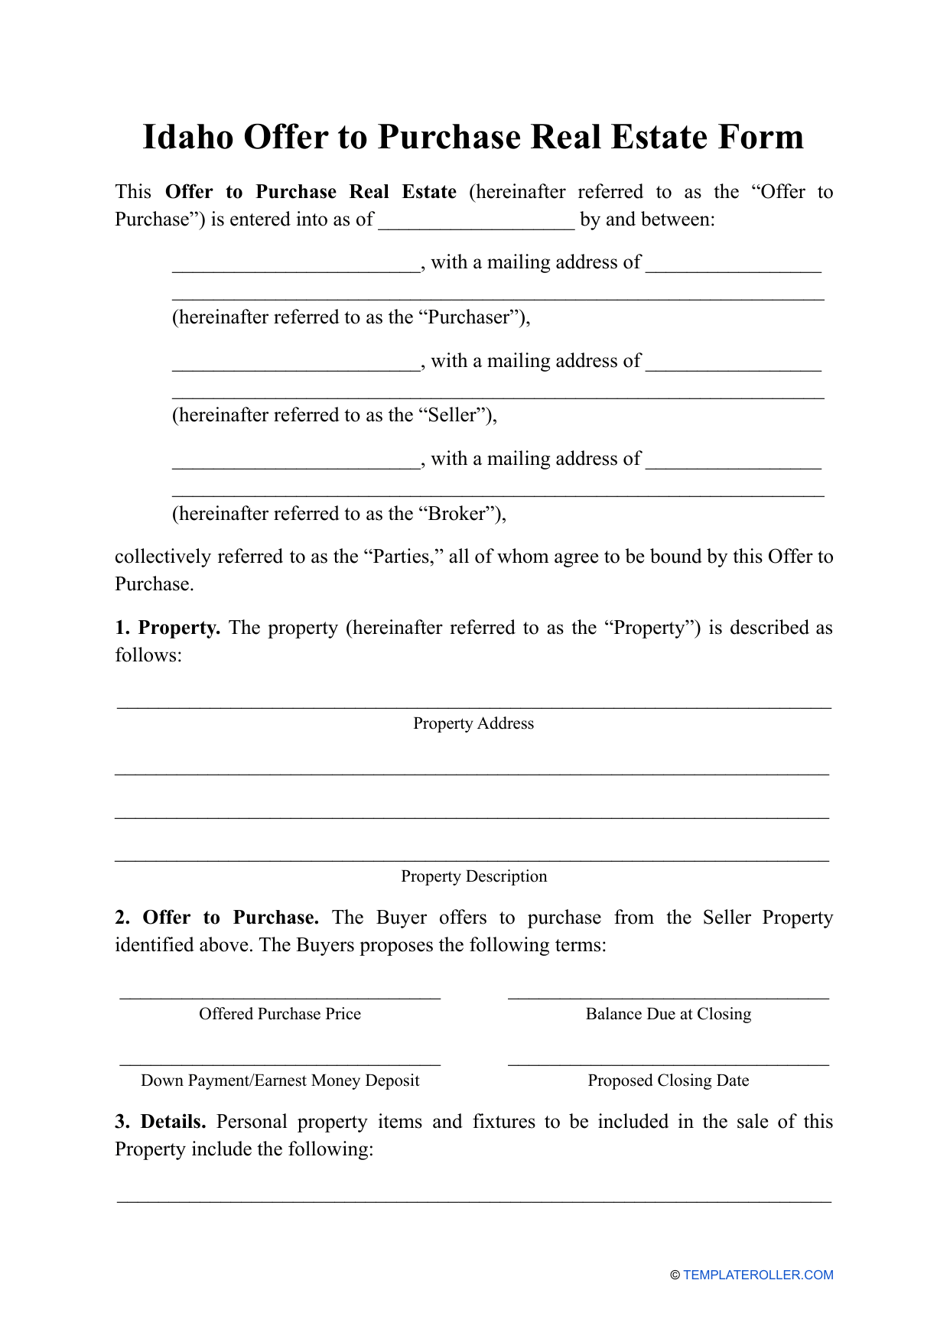 Offer to Purchase Real Estate Form - Idaho, Page 1